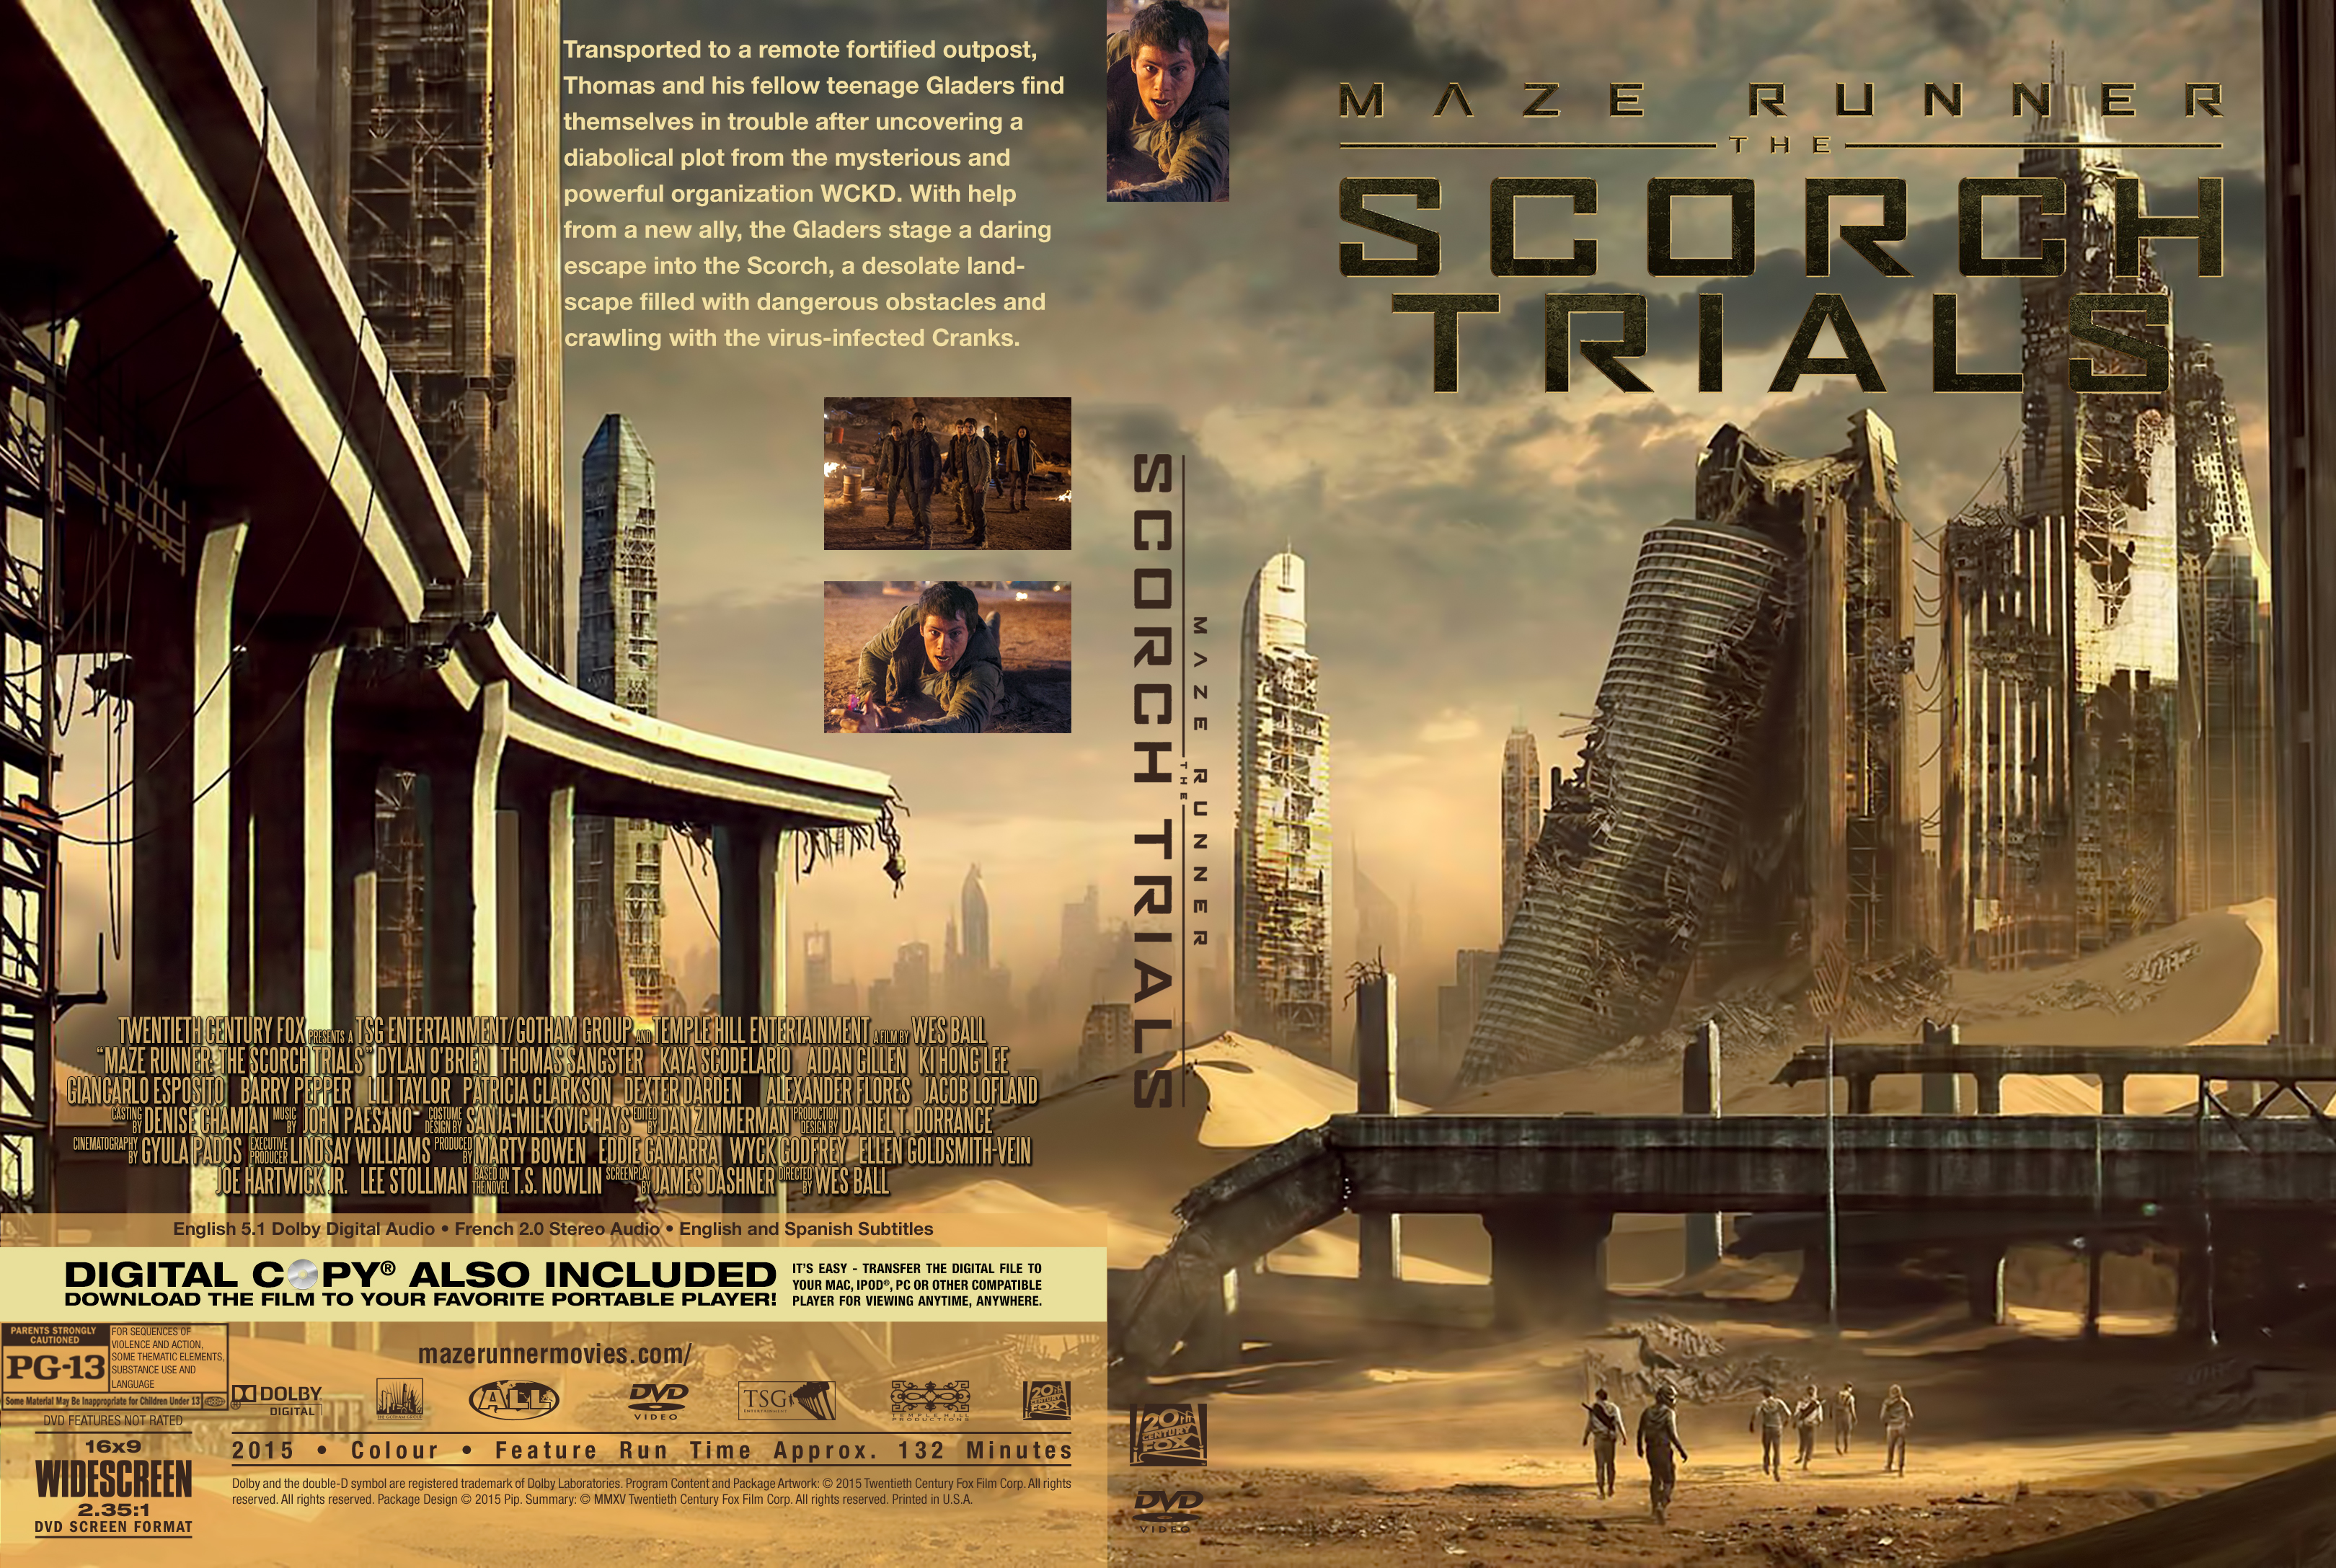 Maze Runner The Scorch Trials Movie – French Poster